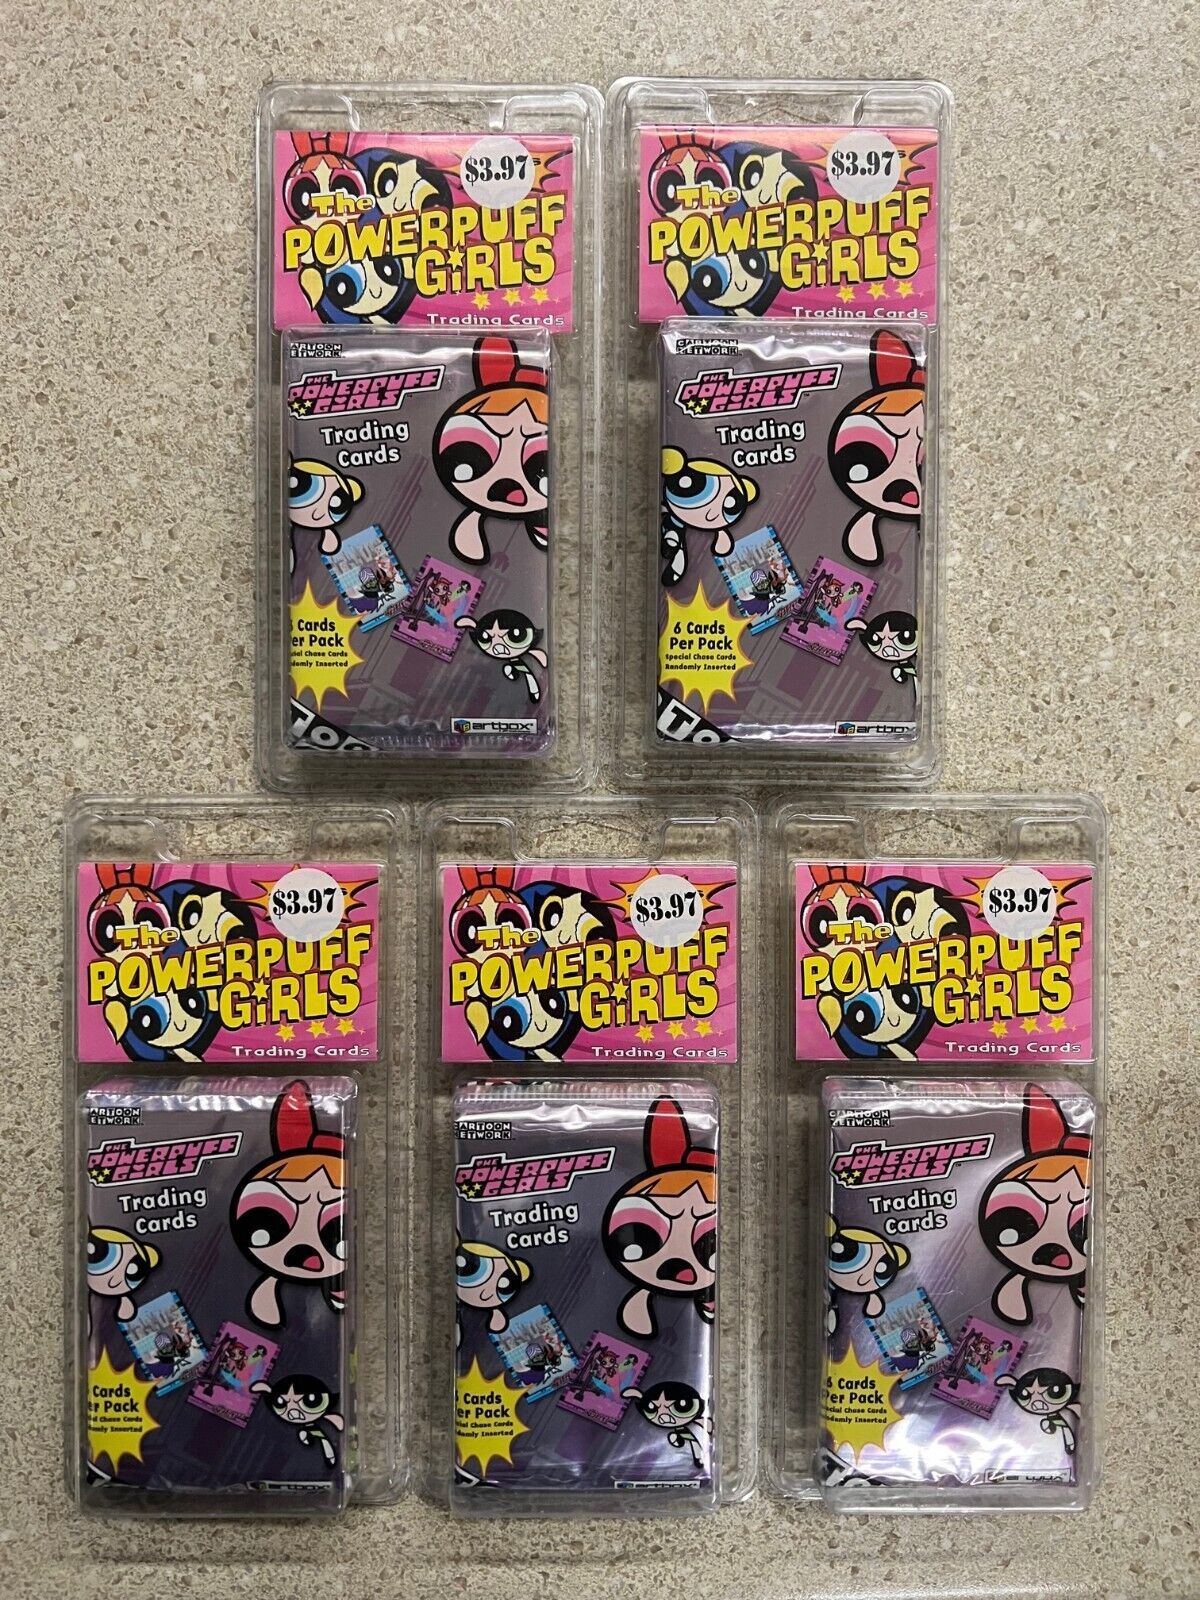 Lot of 5 Powerpuff Girls Trading Card pack 2ct New (10 packs total)